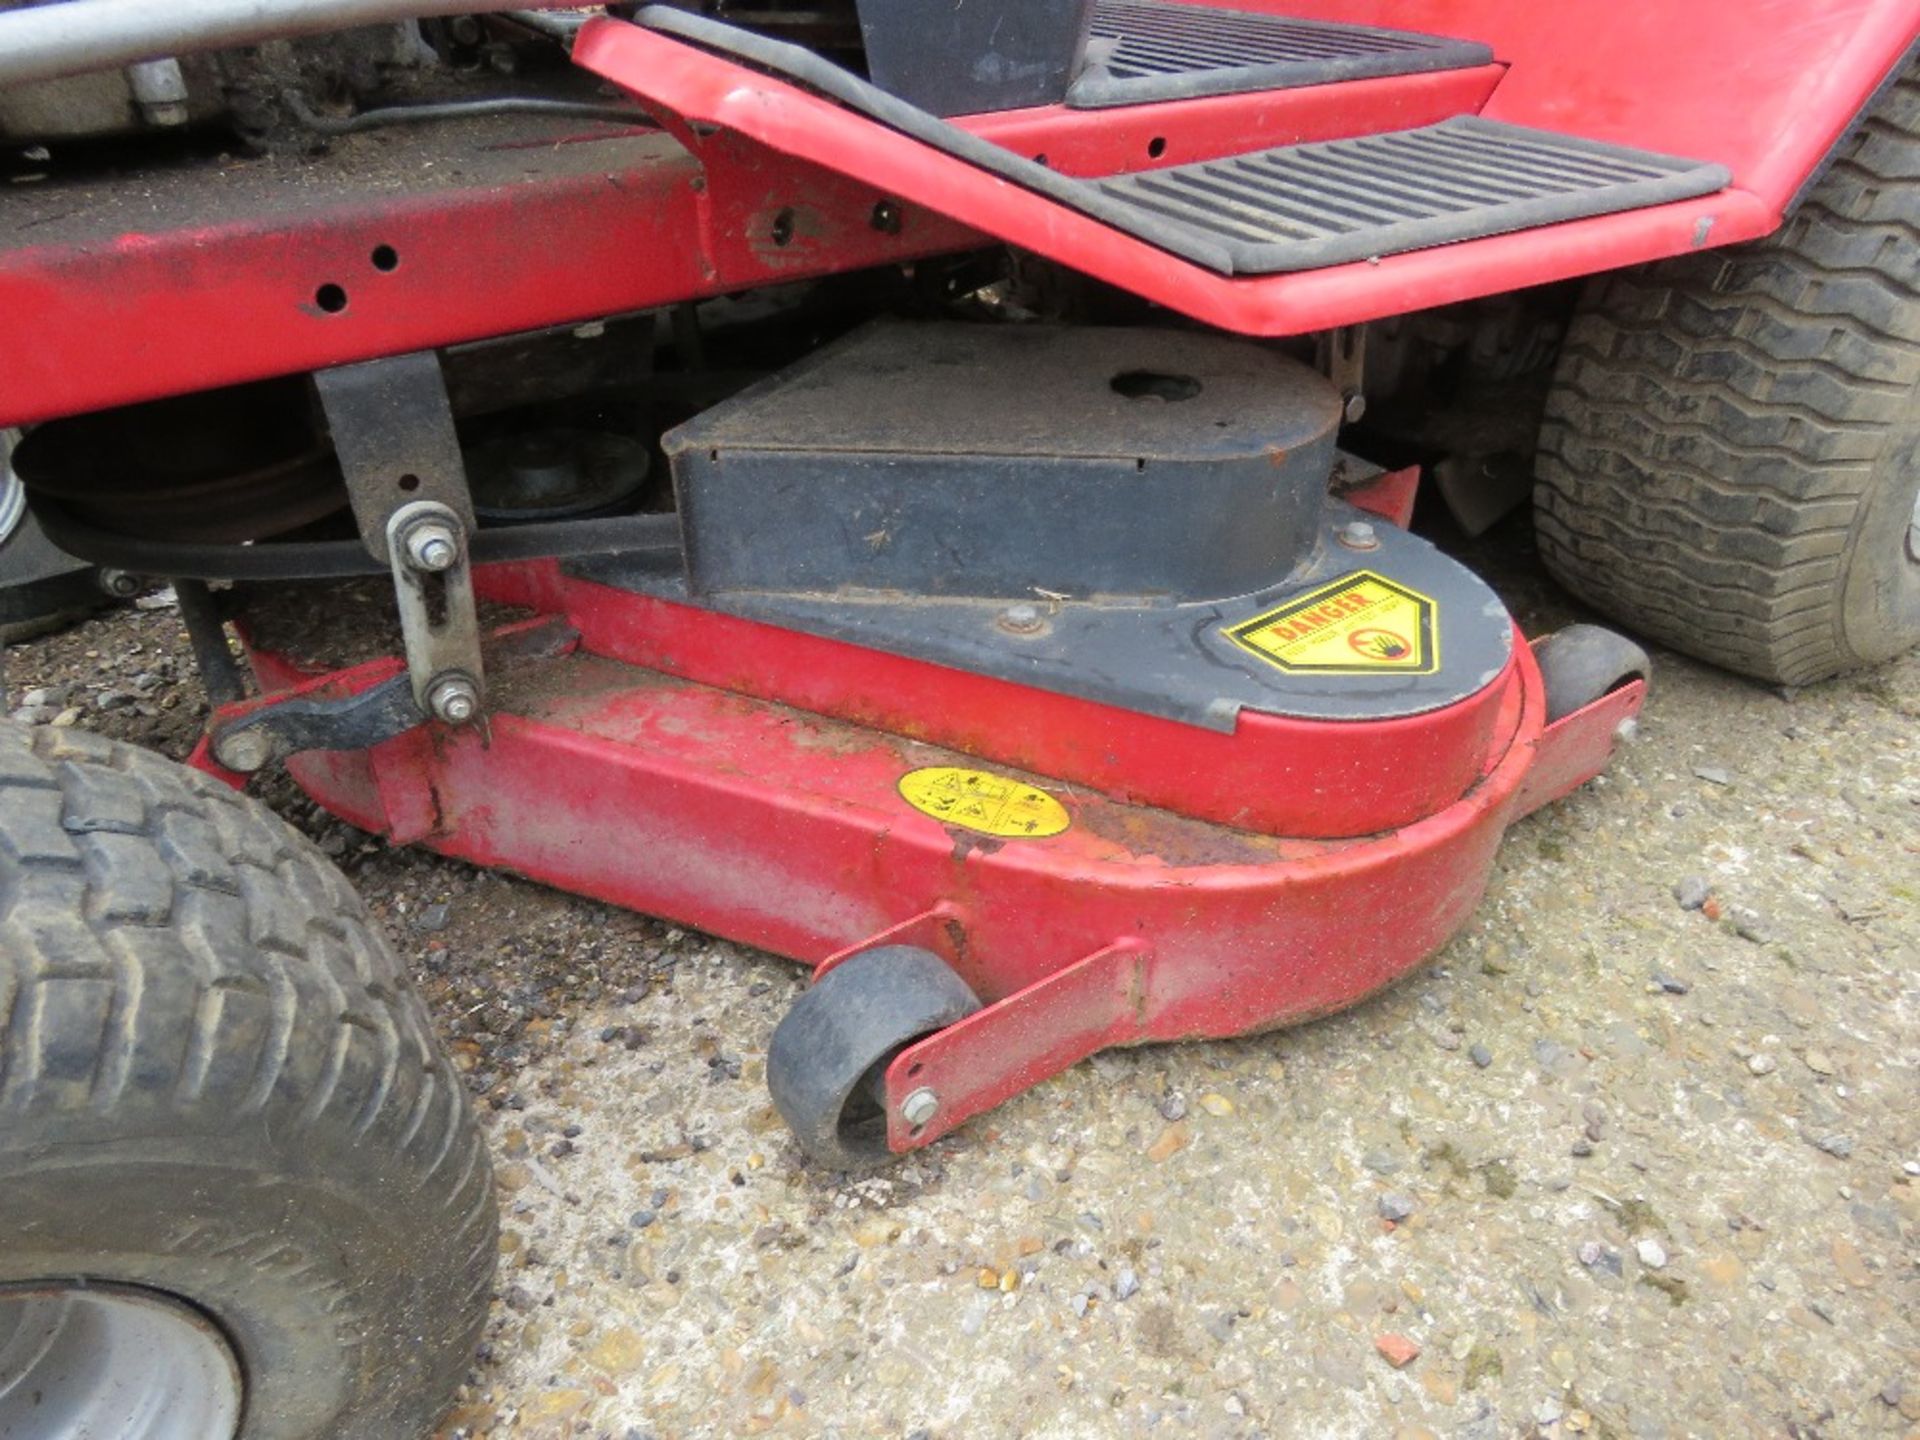 WESTWOOD S1300 RIDE ON MOWER WITH COLLECTOR. WHEN TESTED WAS SEEN TO RUN BUT DRIVE NO ENGAGING?? - Image 10 of 10